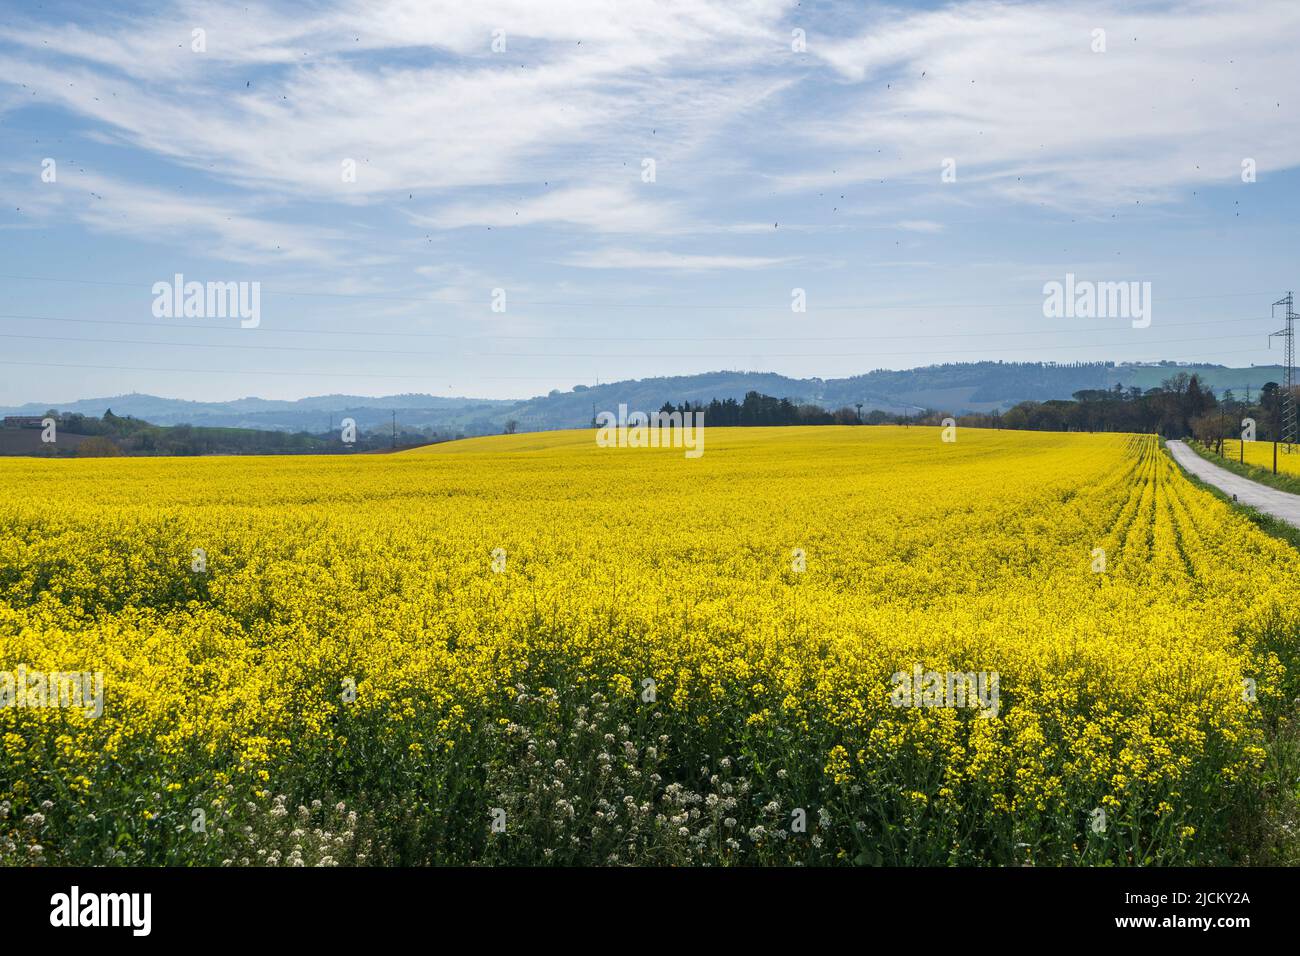 Countryside, rapeseed field, Macerata, Marche, Italy, Europe Stock Photo